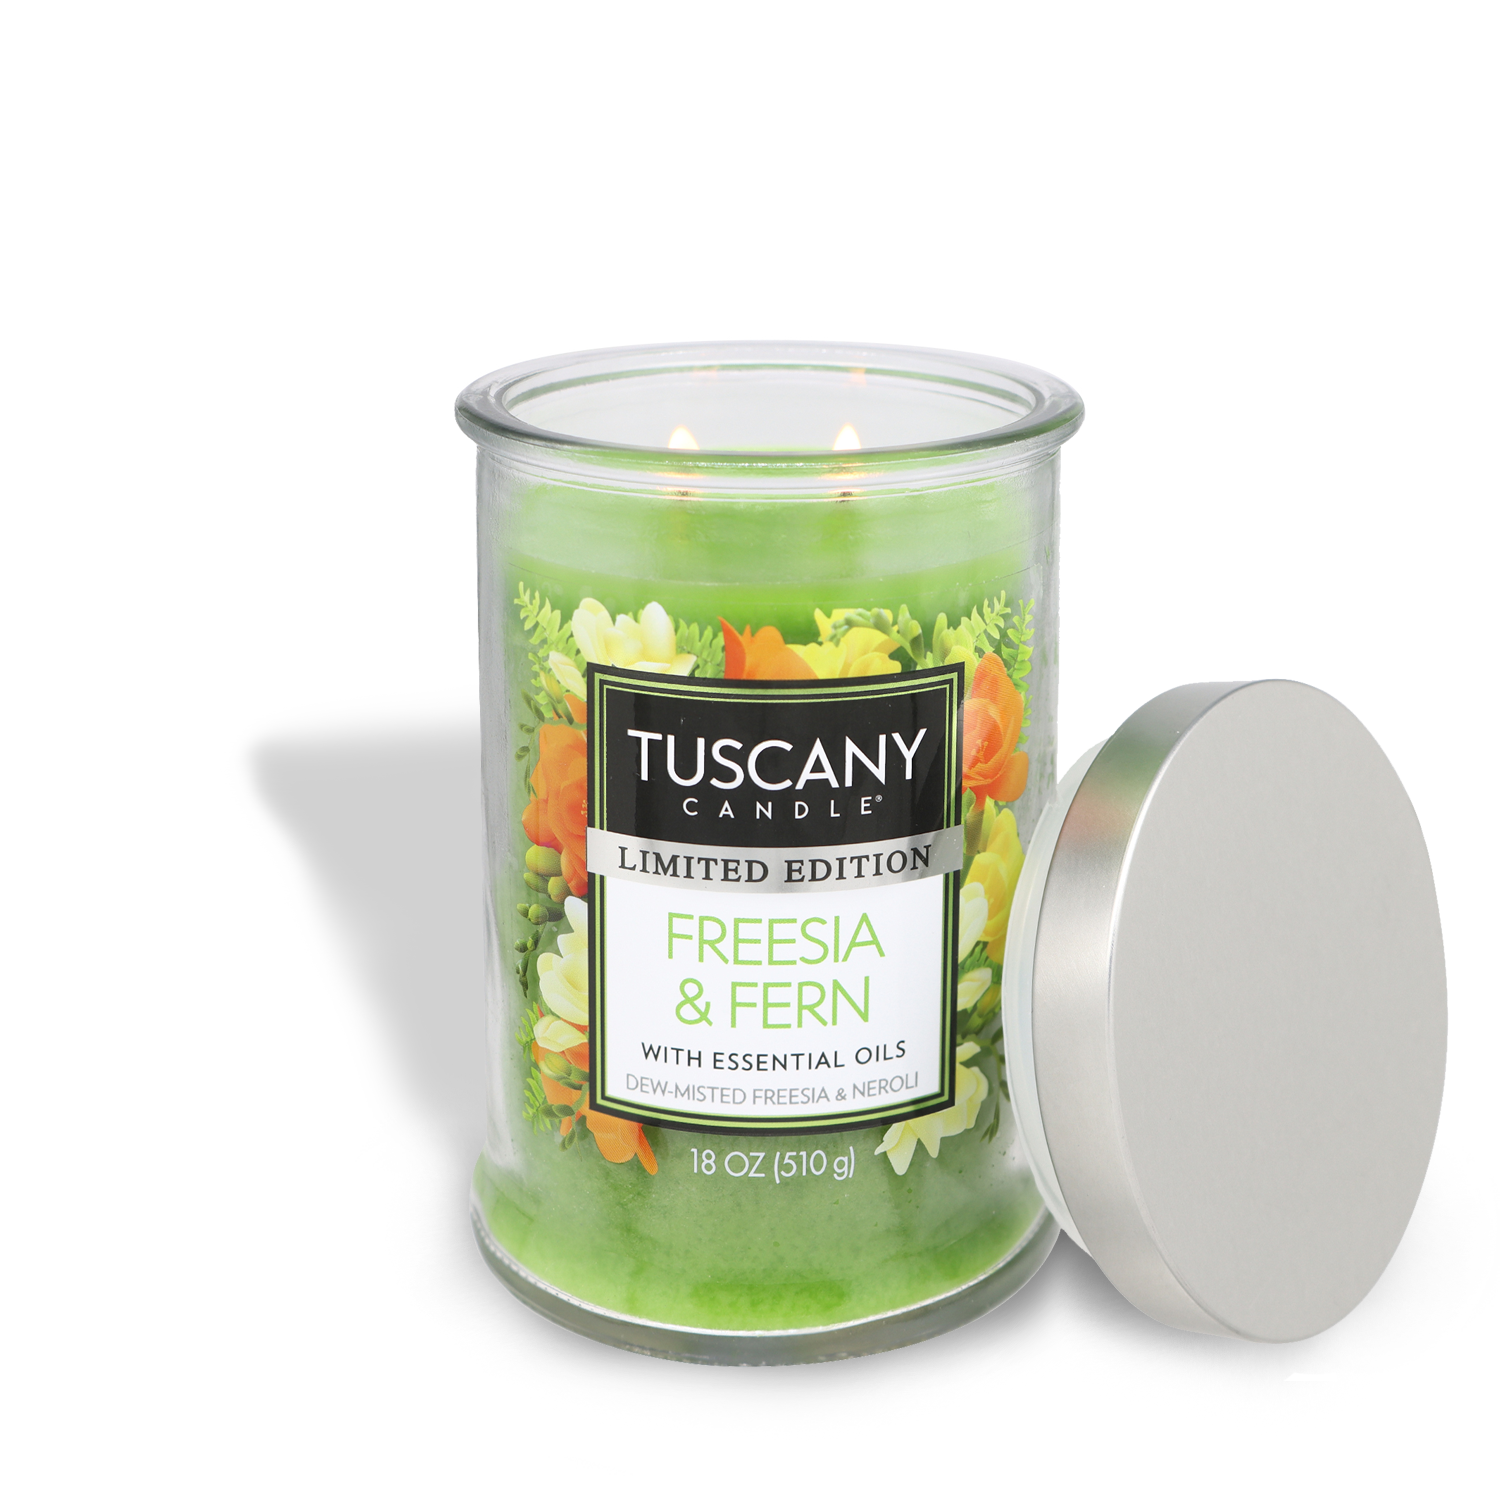 A Freesia & Fern Long-Lasting Scented Jar Candle (18 oz) with a lid, perfect for the Summer Collection by Tuscany Candle® SEASONAL.